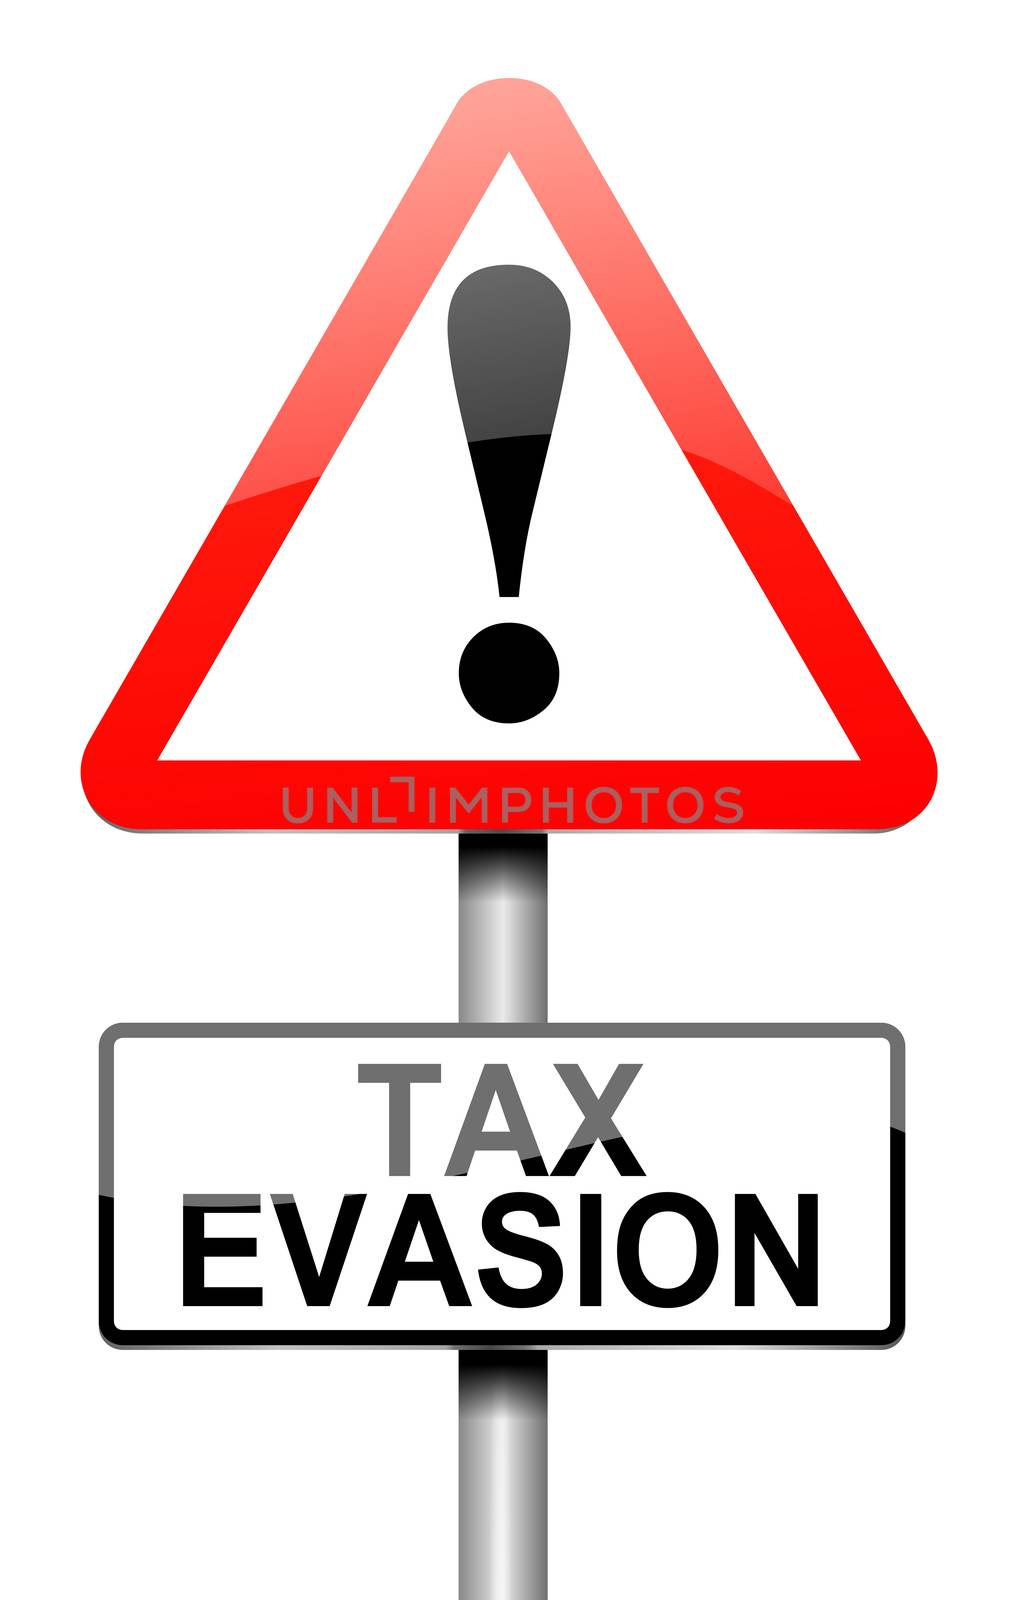 Tax evasion sign. by 72soul